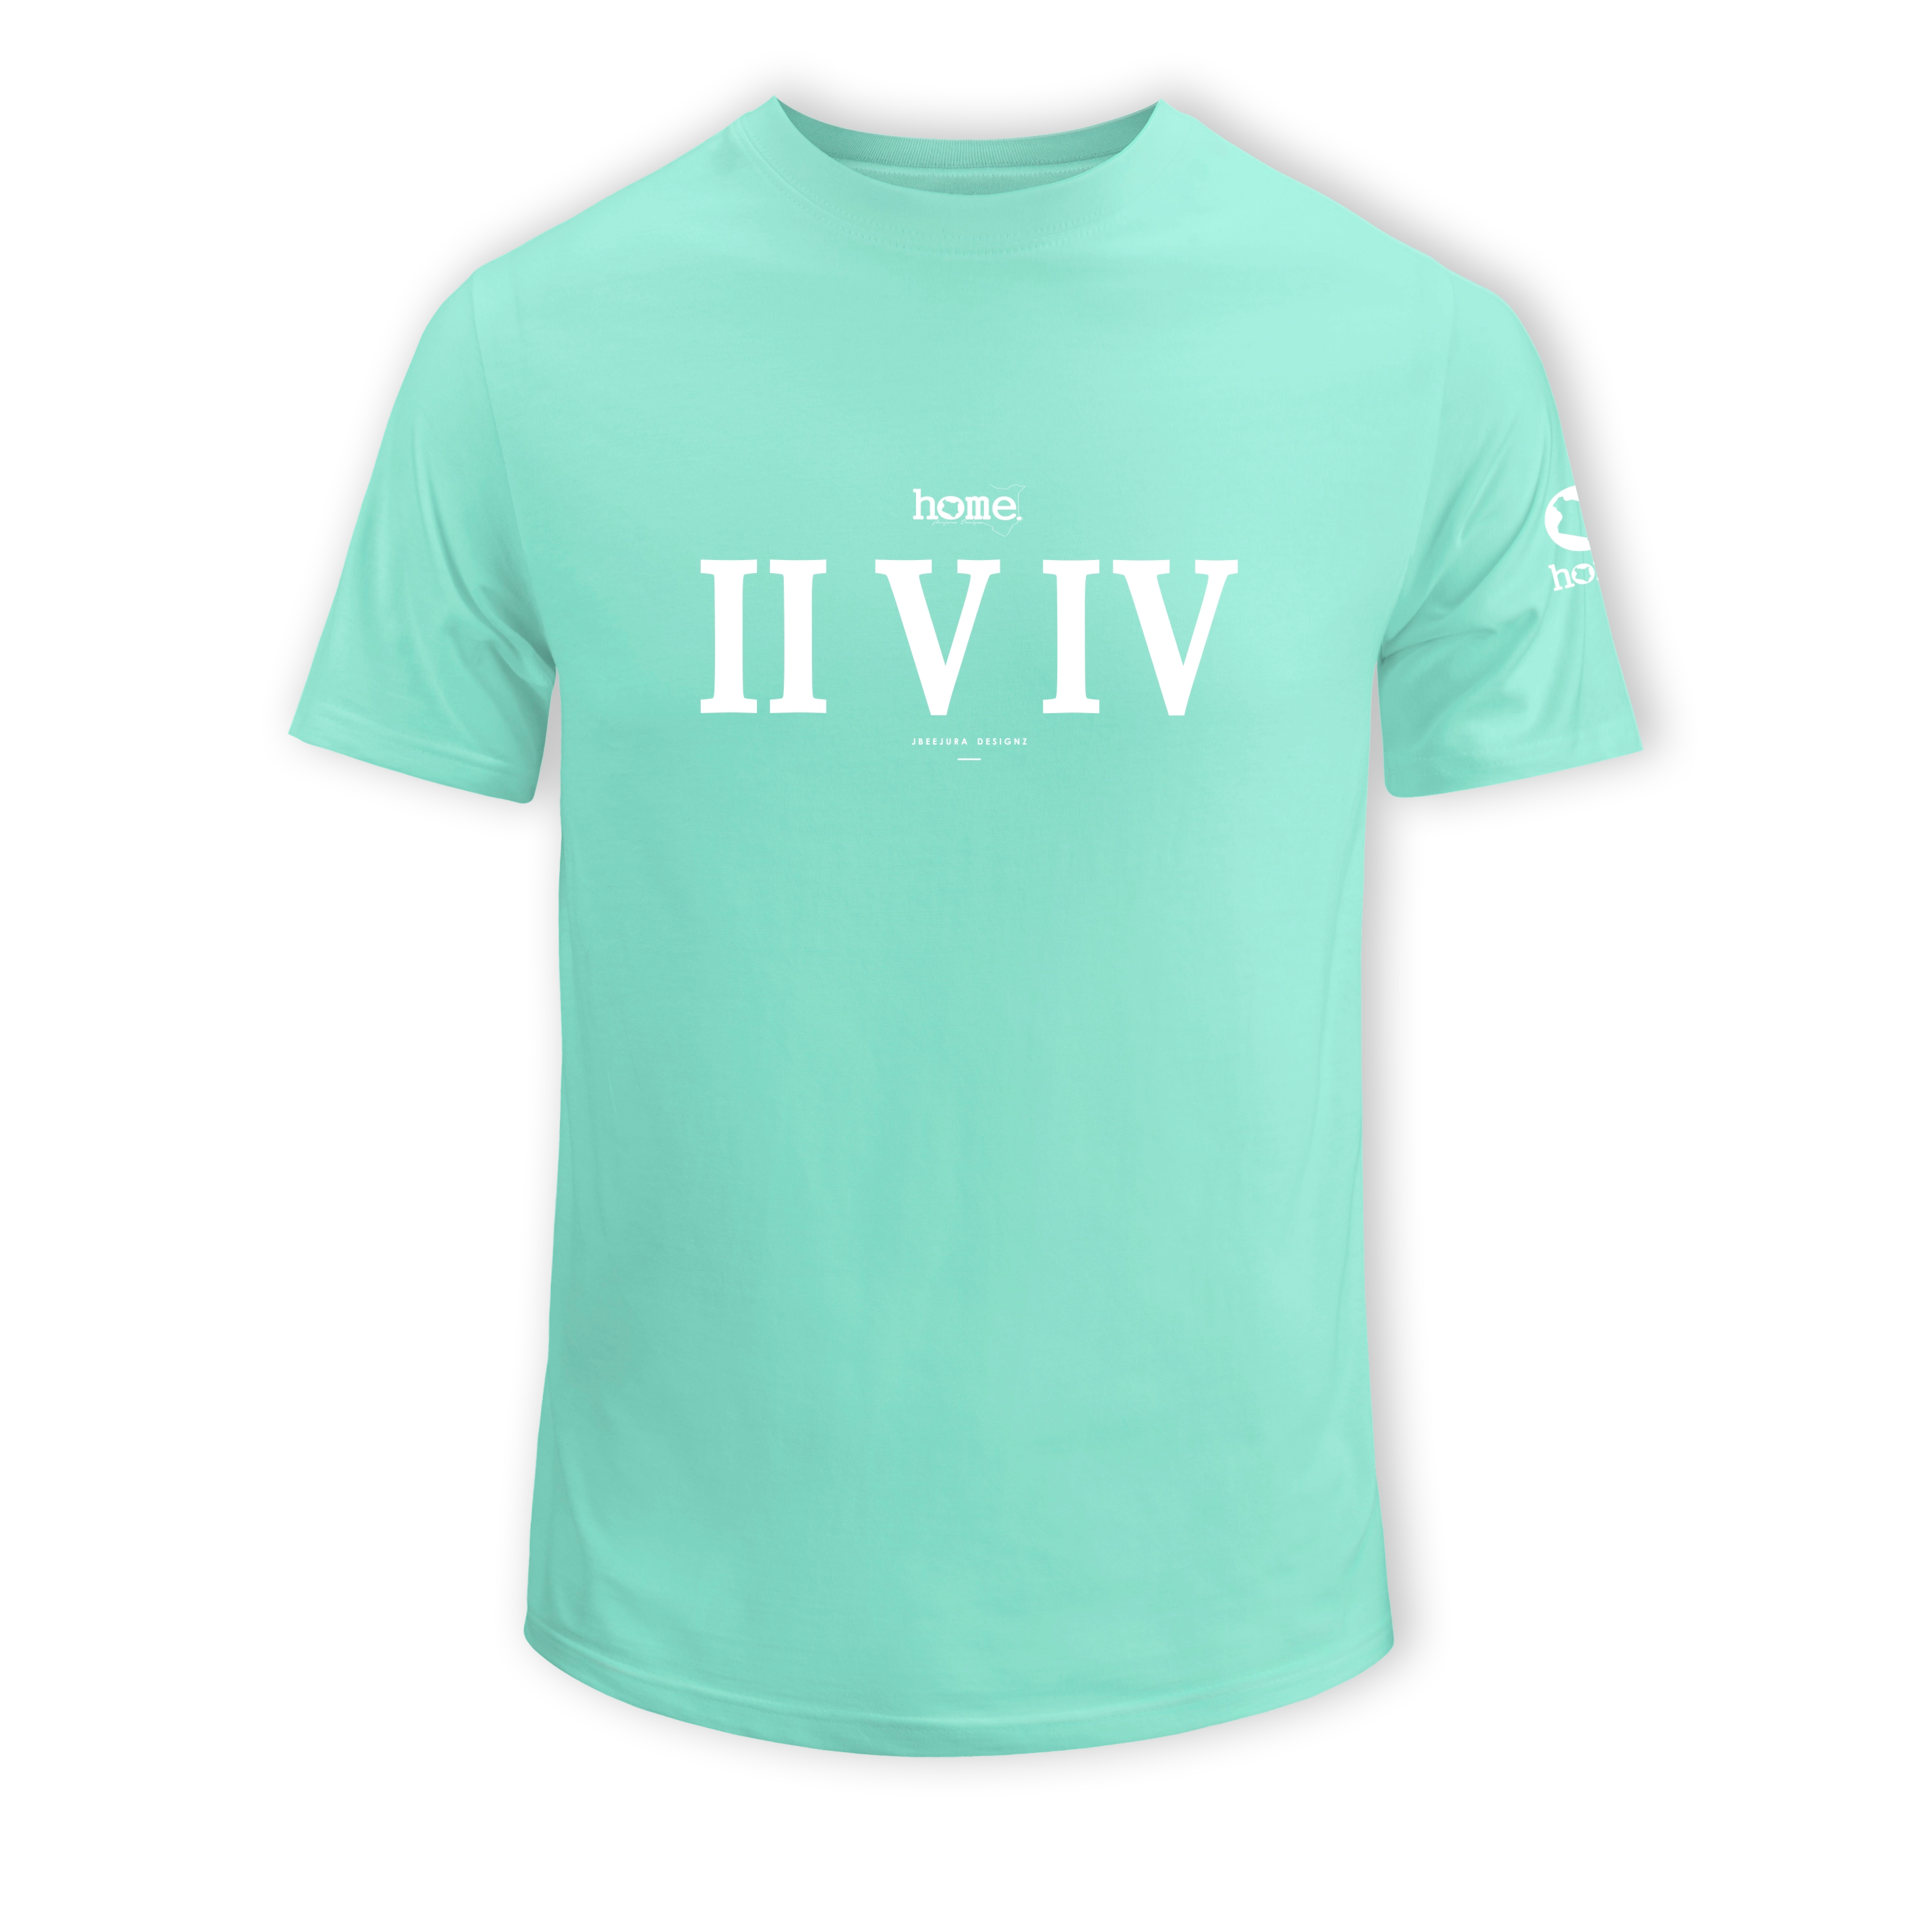 home_254 SHORT-SLEEVED TURQUOISE GREEN T-SHIRT WITH A WHITE ROMAN NUMERALS PRINT – COTTON PLUS FABRIC